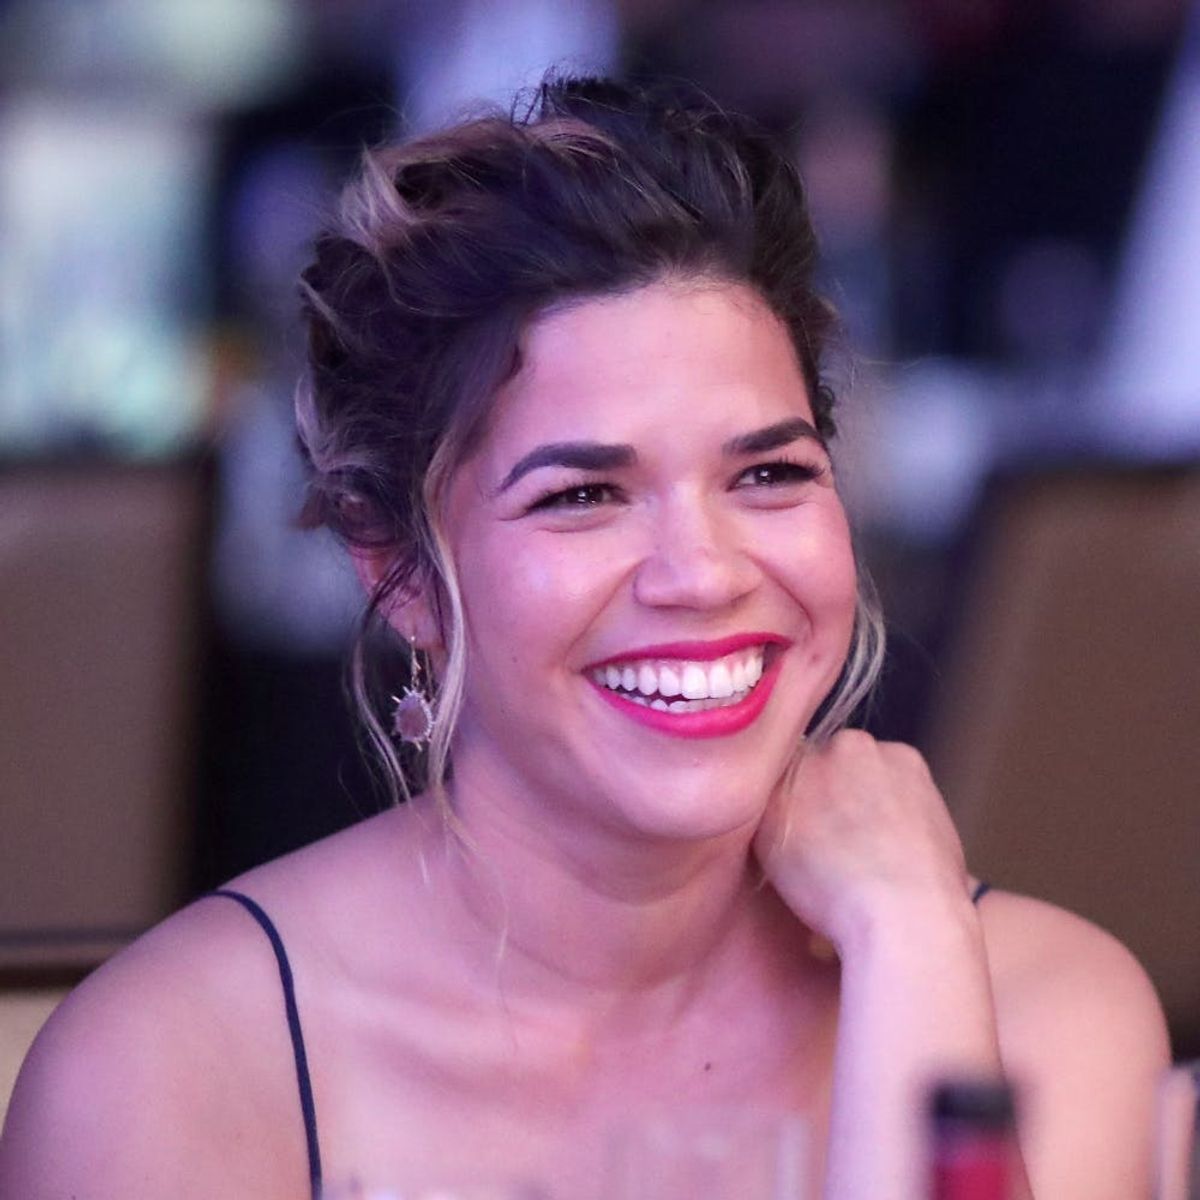 America Ferrera Just Made Sisterhood of the Traveling Pants Fans MAJORLY Excited